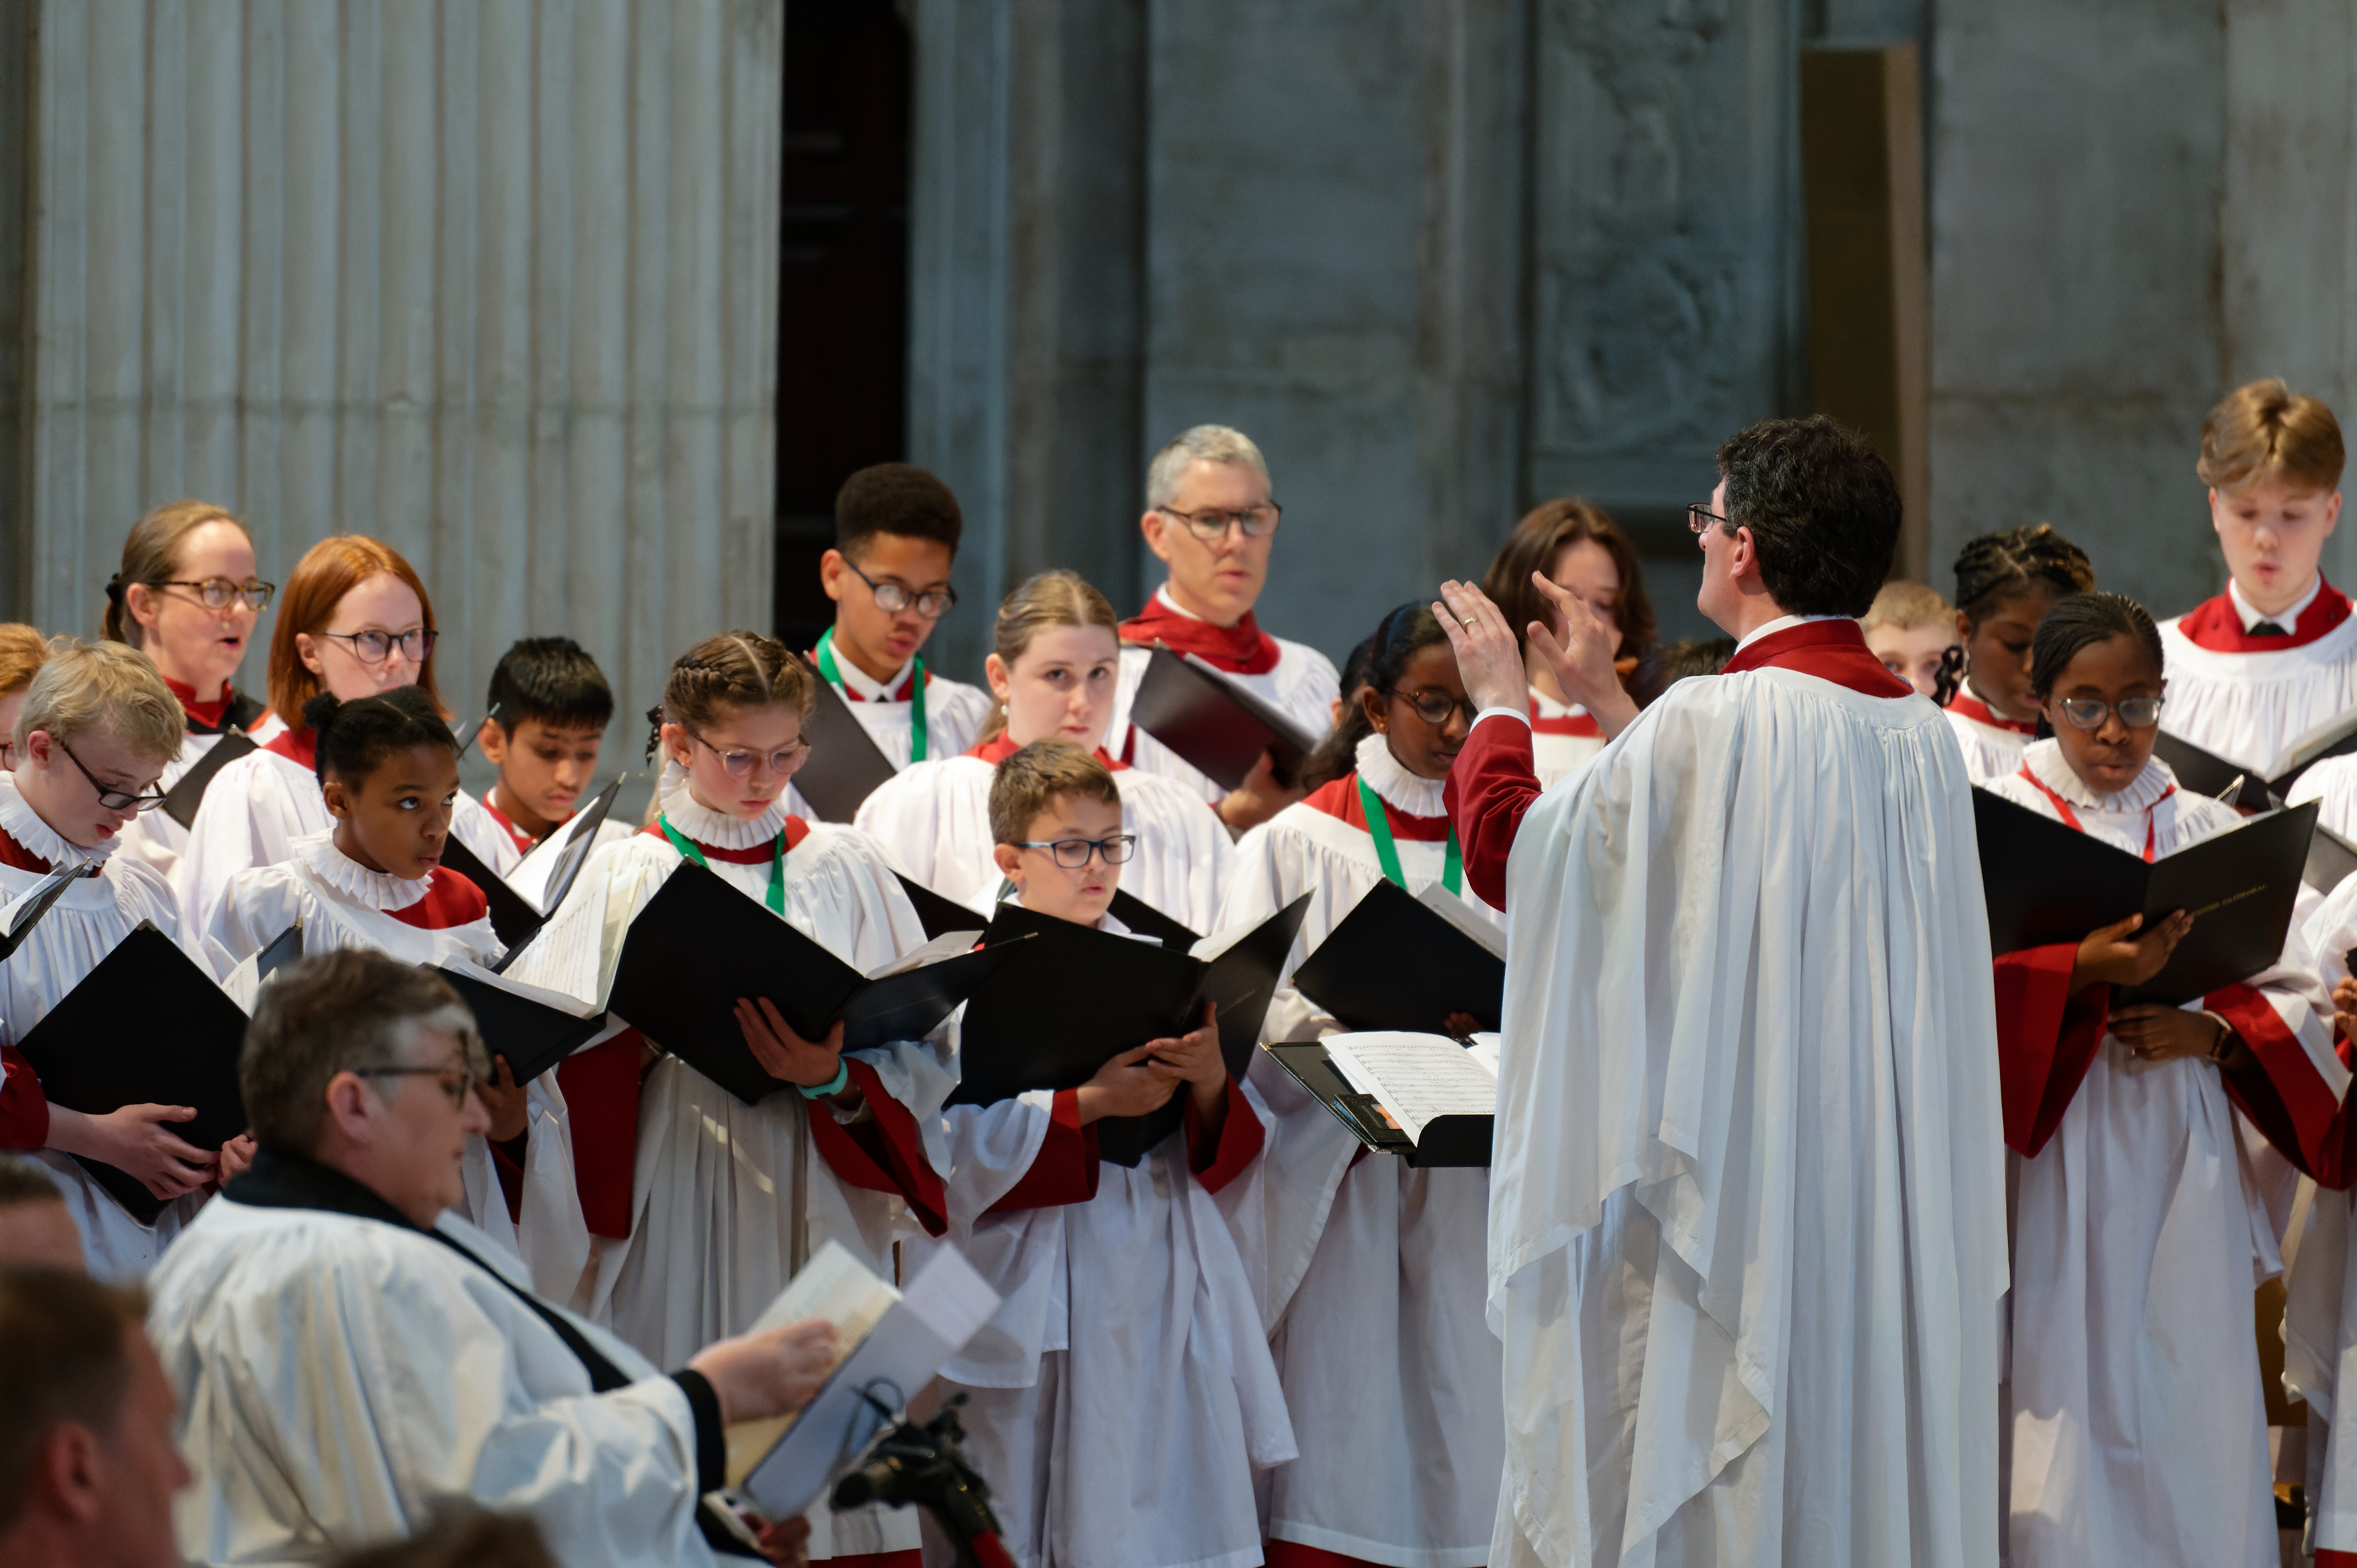 Led by a choirmaster with black hair and glasses, a choir of young people in white robes and green lanyards sing from their songbooks.